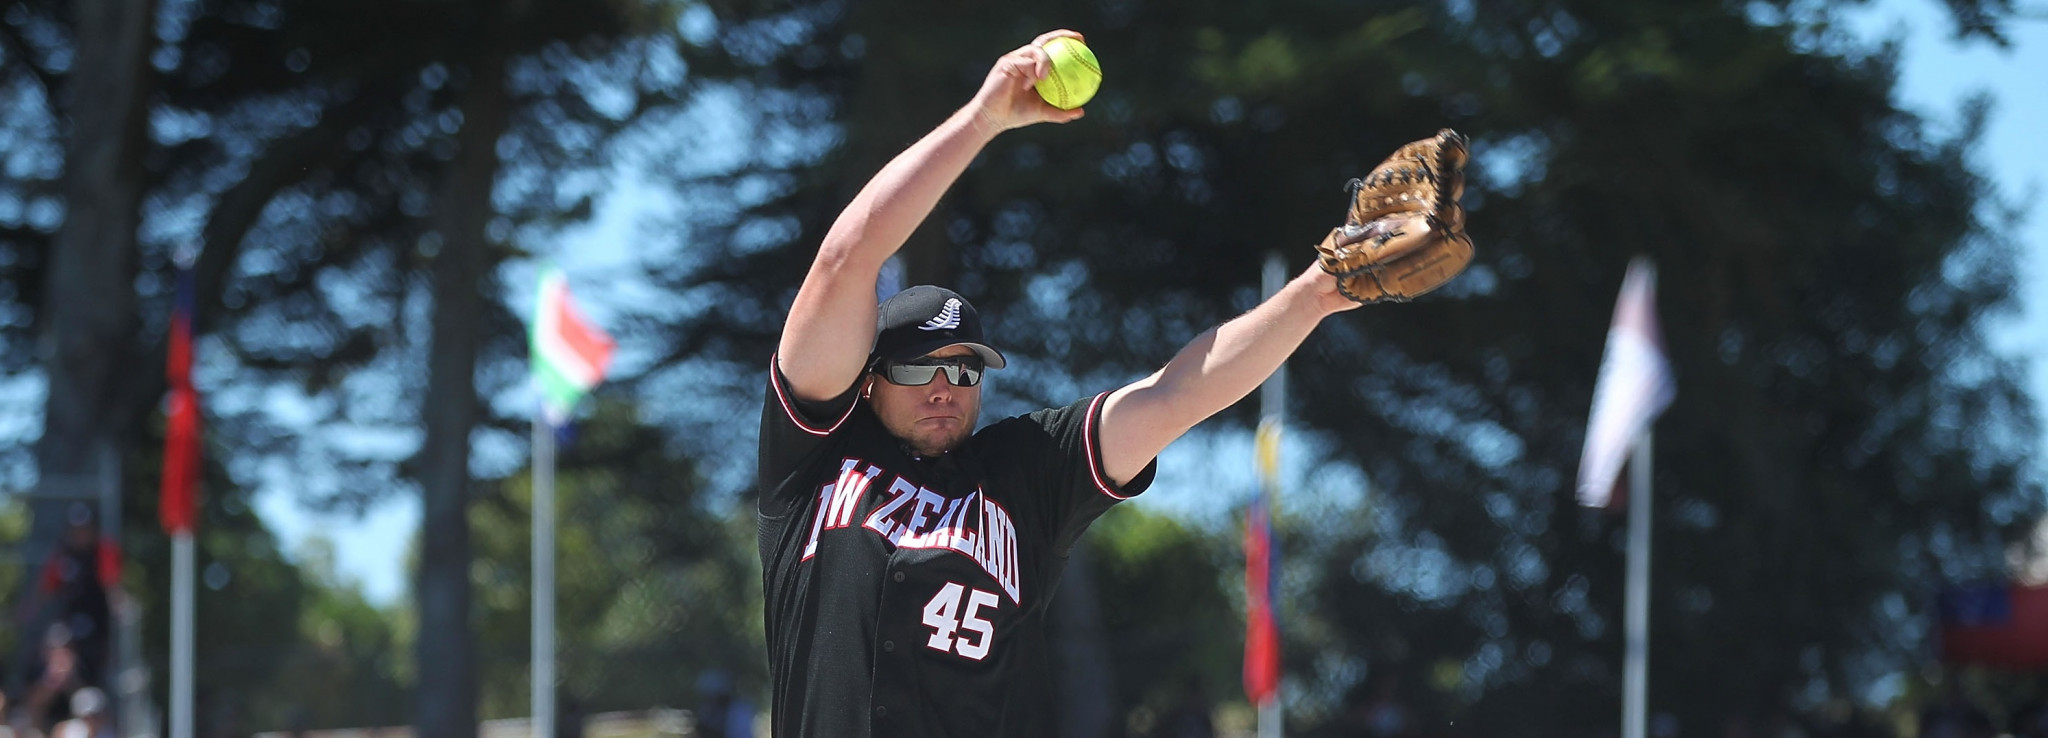 Promotional video marks one year until WBSC Men's Softball World Cup in New Zealand